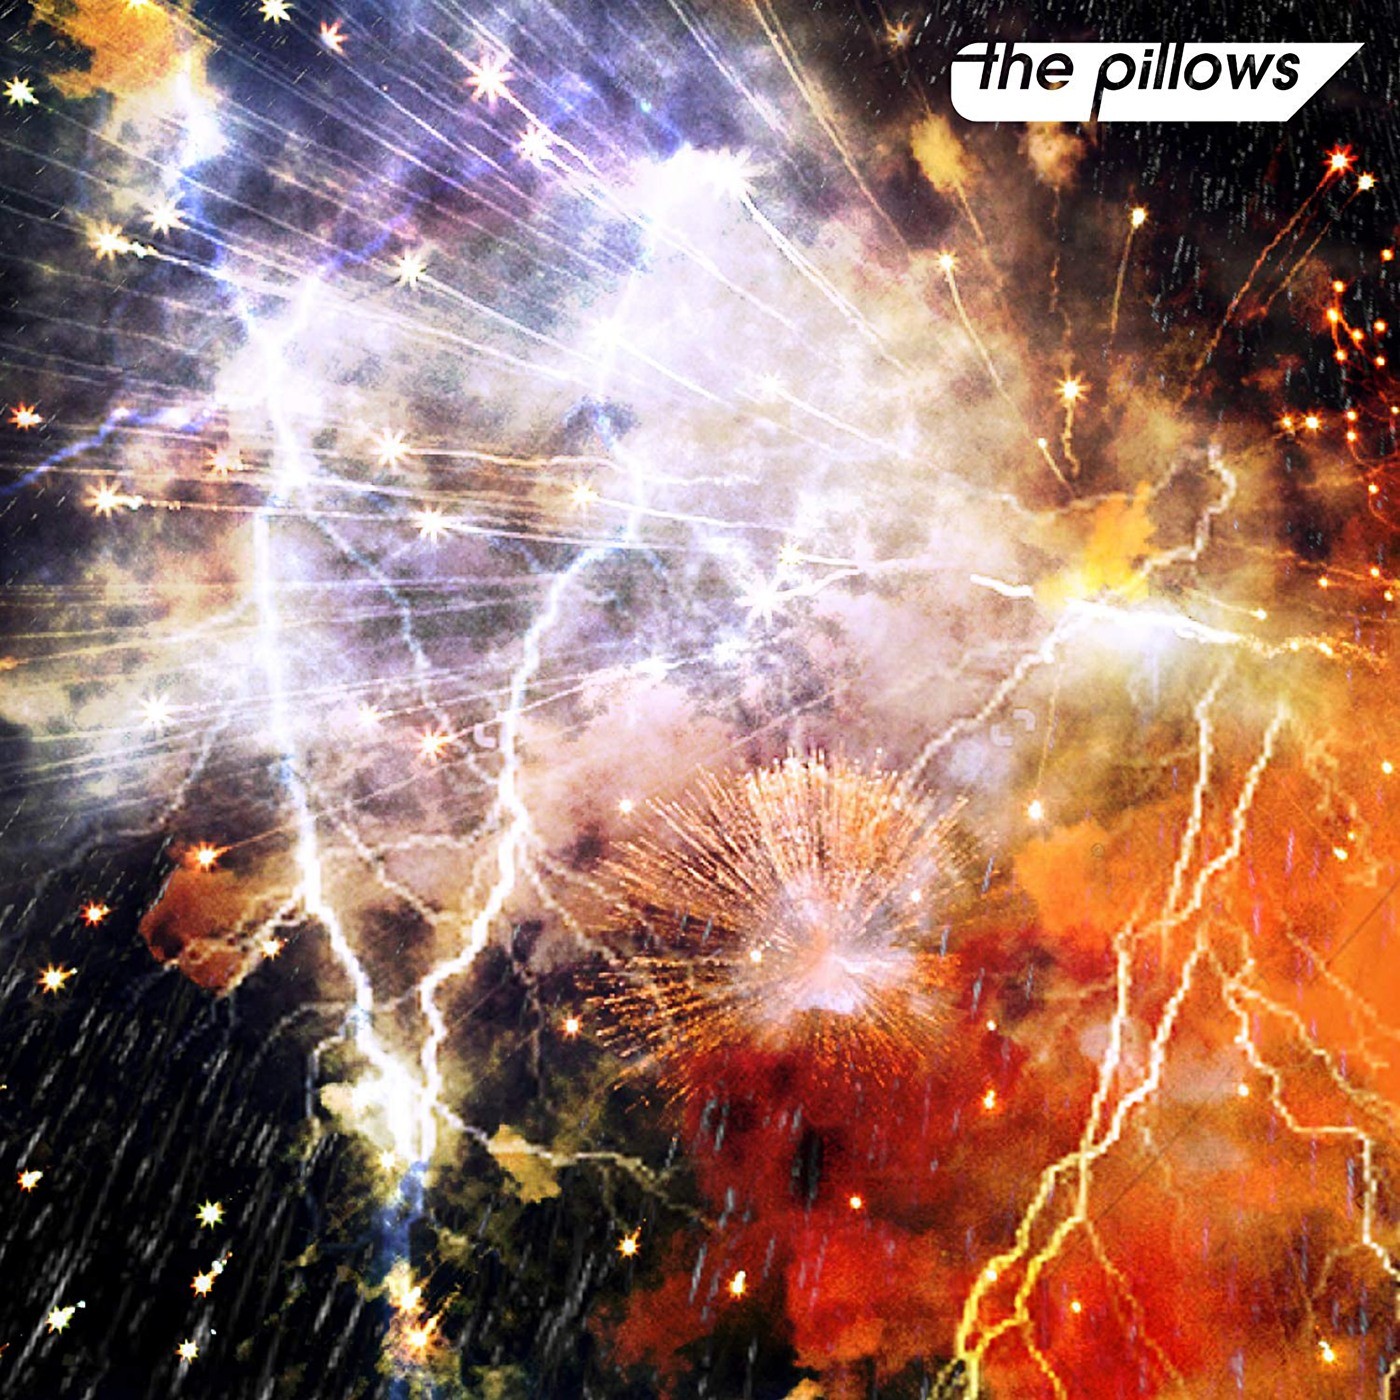 the pillows – REBROADCAST [CD FLAC + CD MP3 + DVD ISO] [2018.09.19]